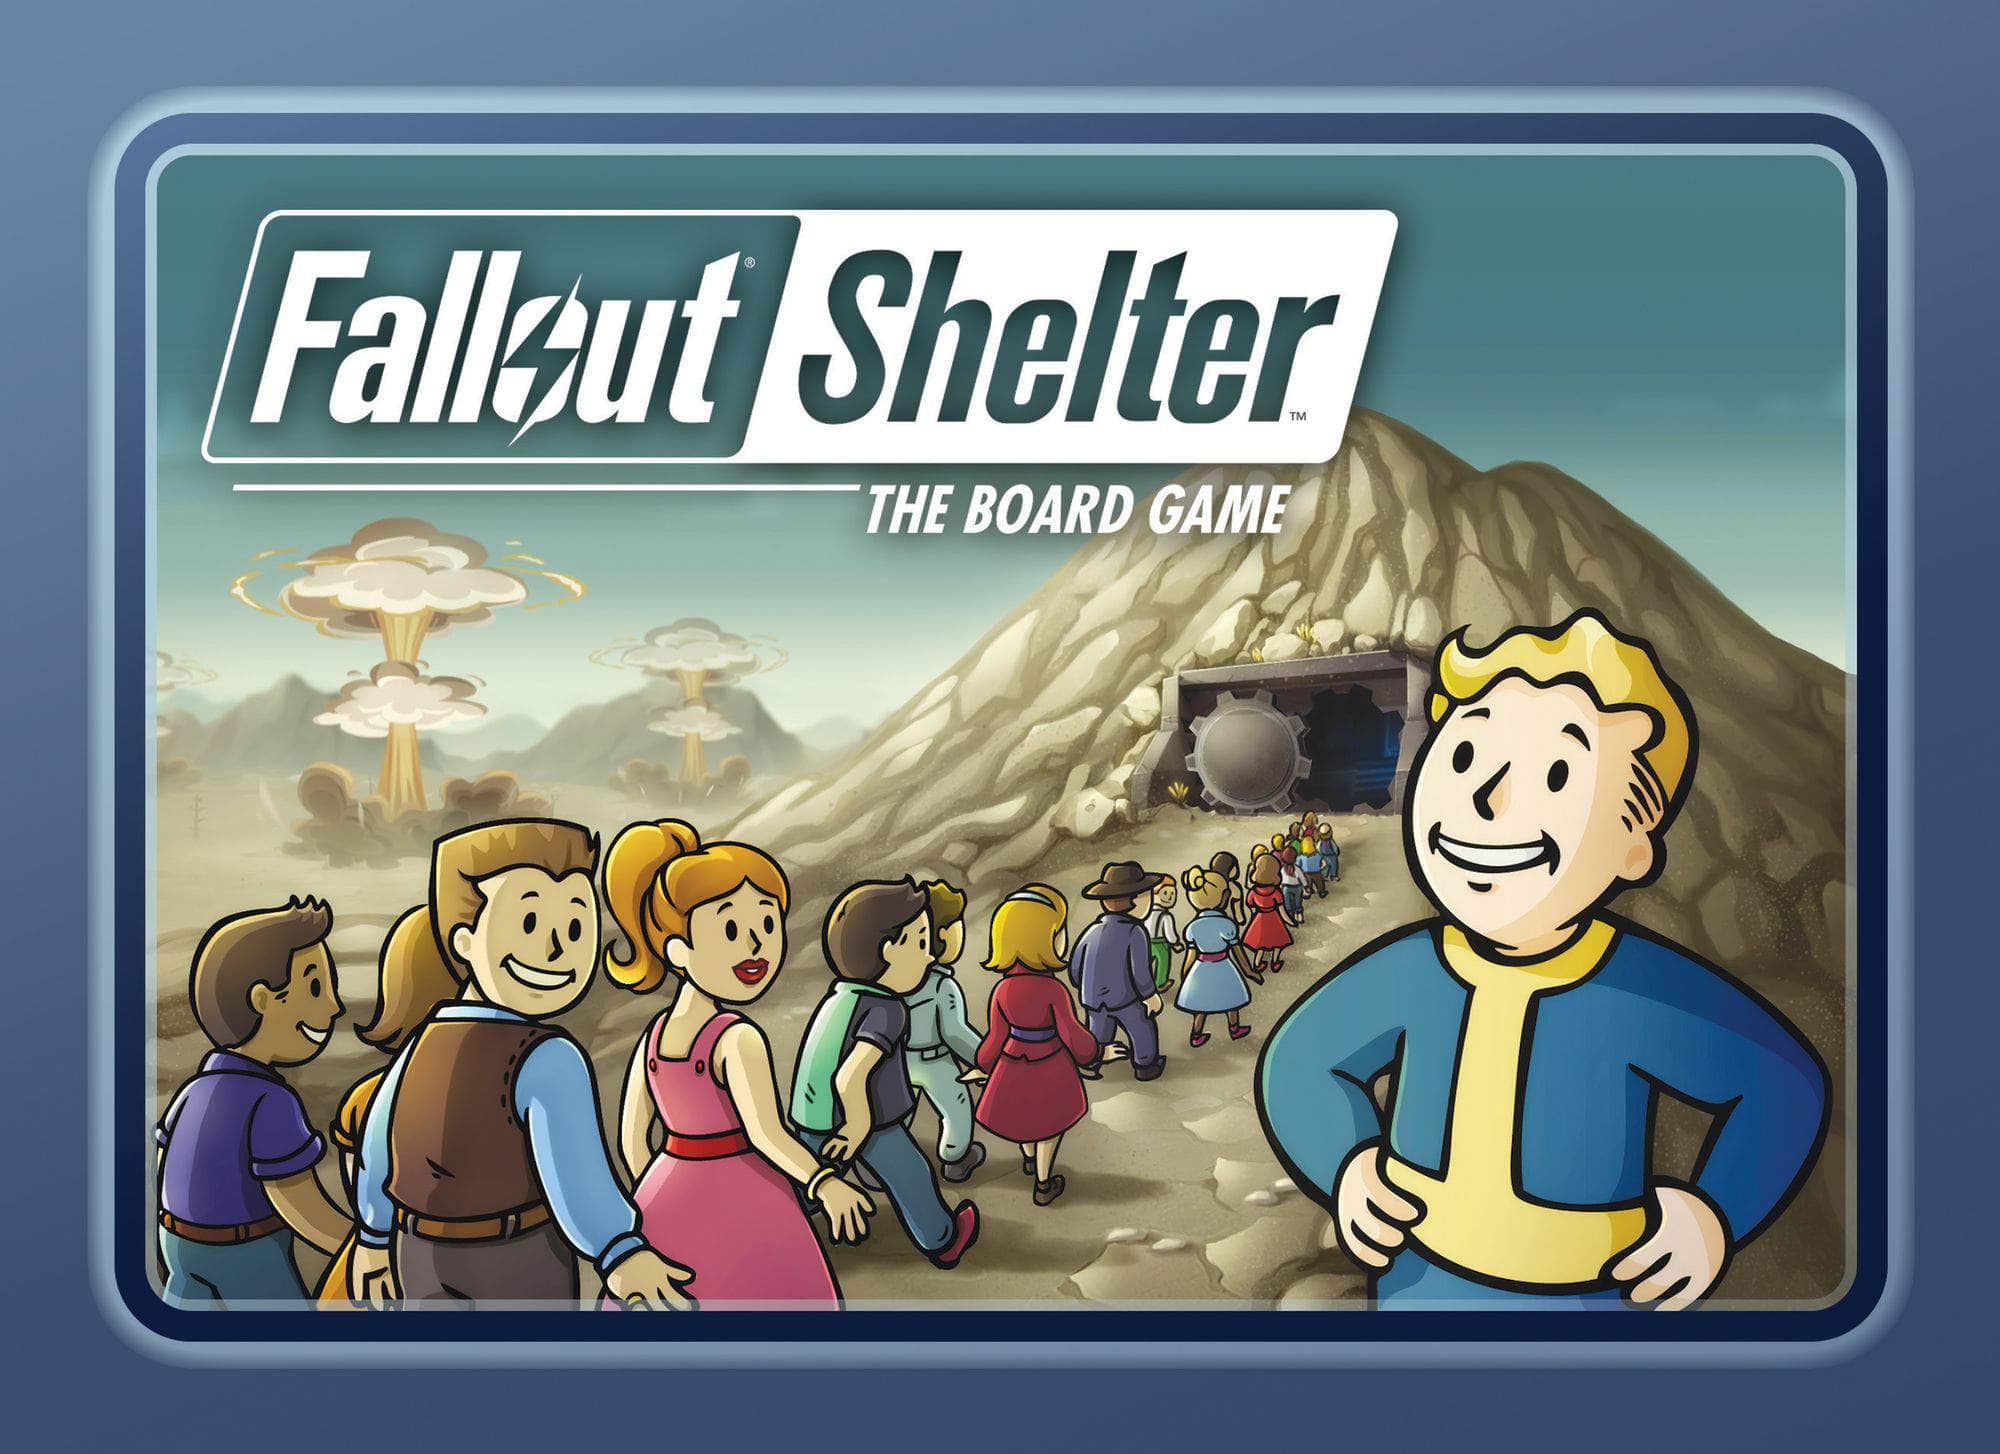 Fallout Shelter (Ding&Dent) (Retail Edition) Retail Board Game Fantasy Flight Games 0841333110765 KS800683A